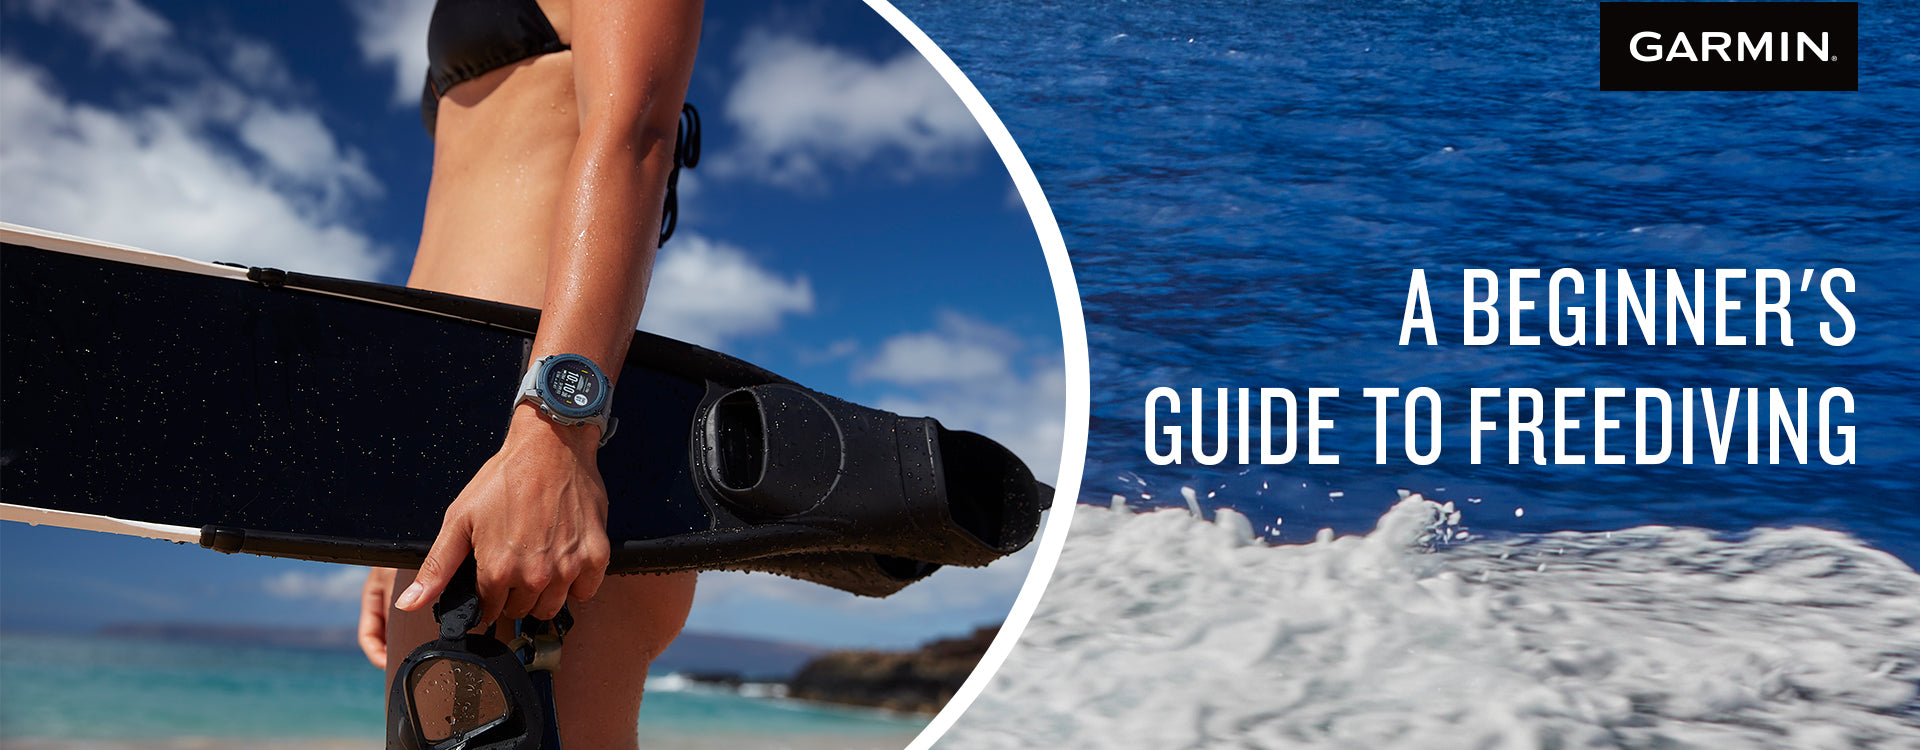 A Beginner's Guide to Freediving